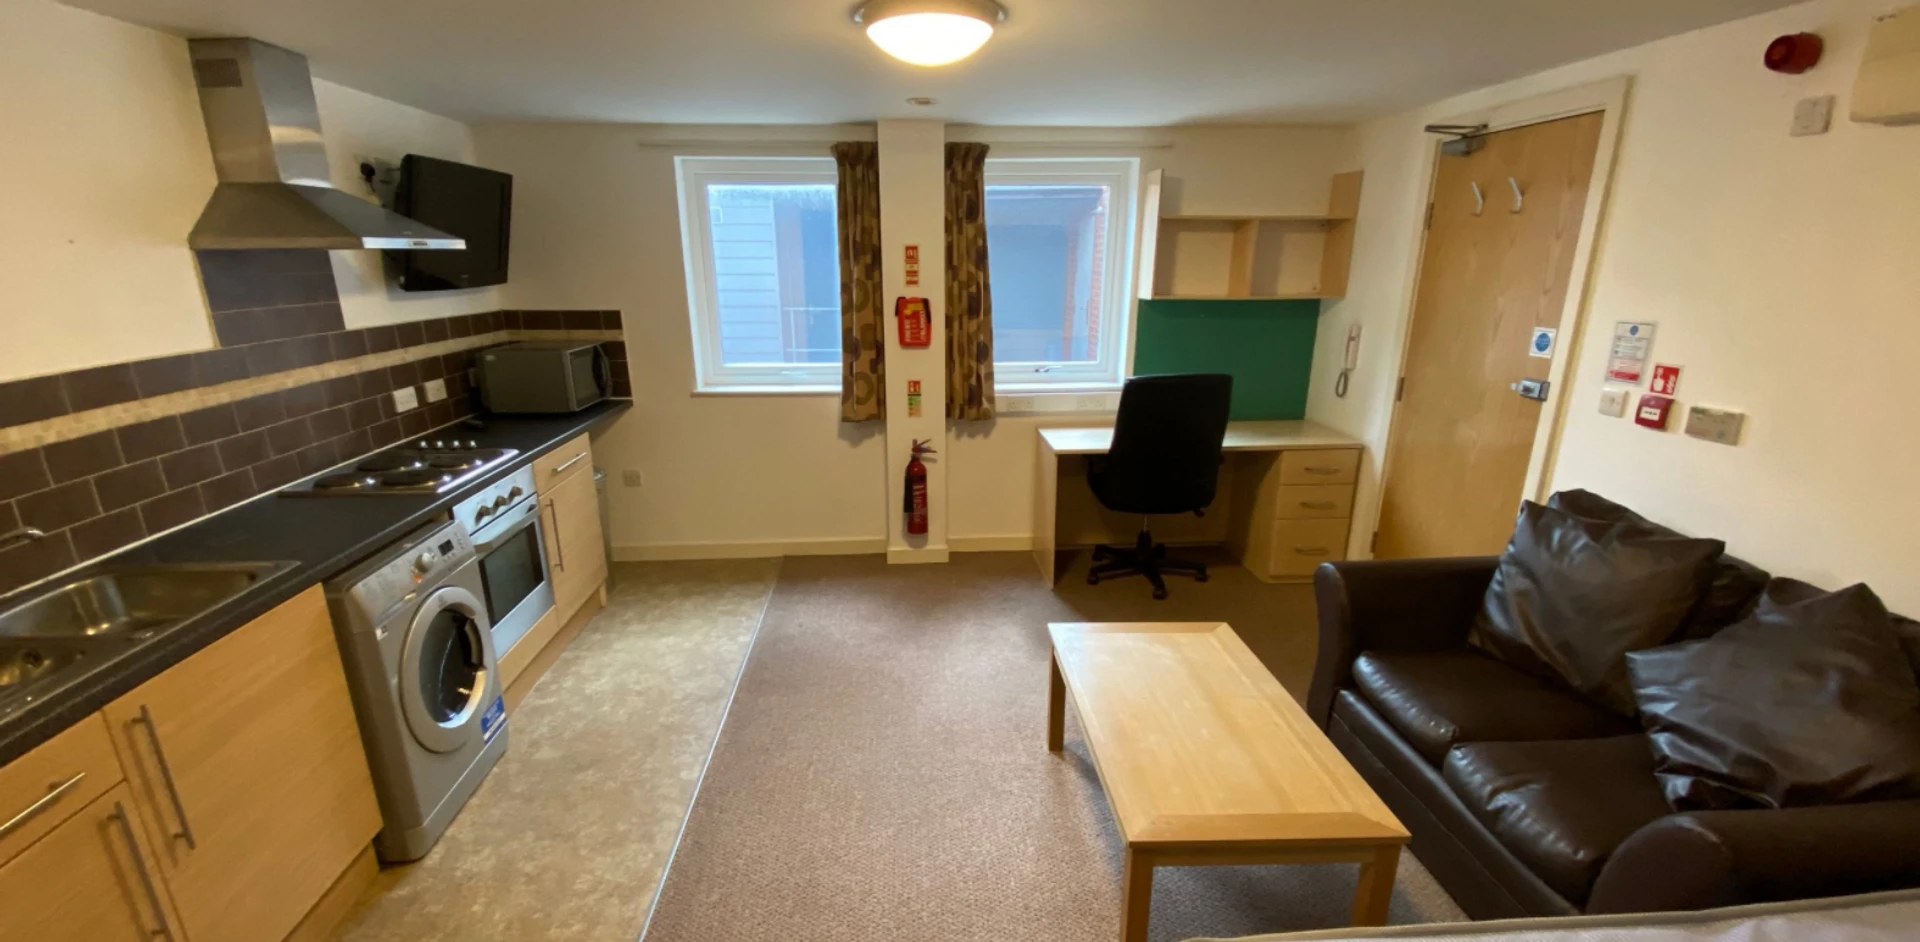 Room for rent in a shared flat in Preston